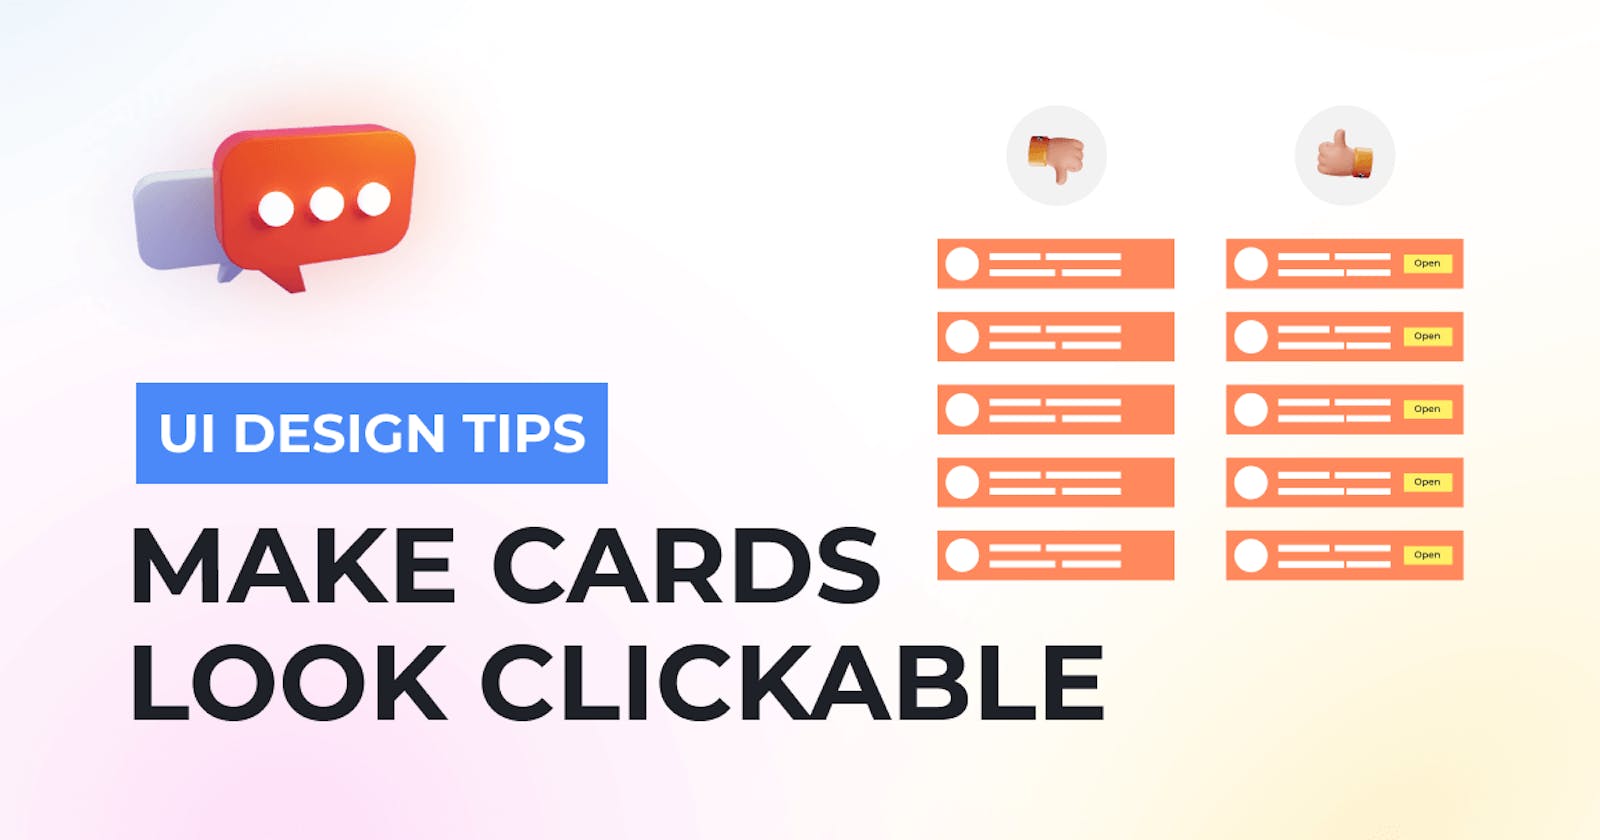 How to make cards look clickable in UI design